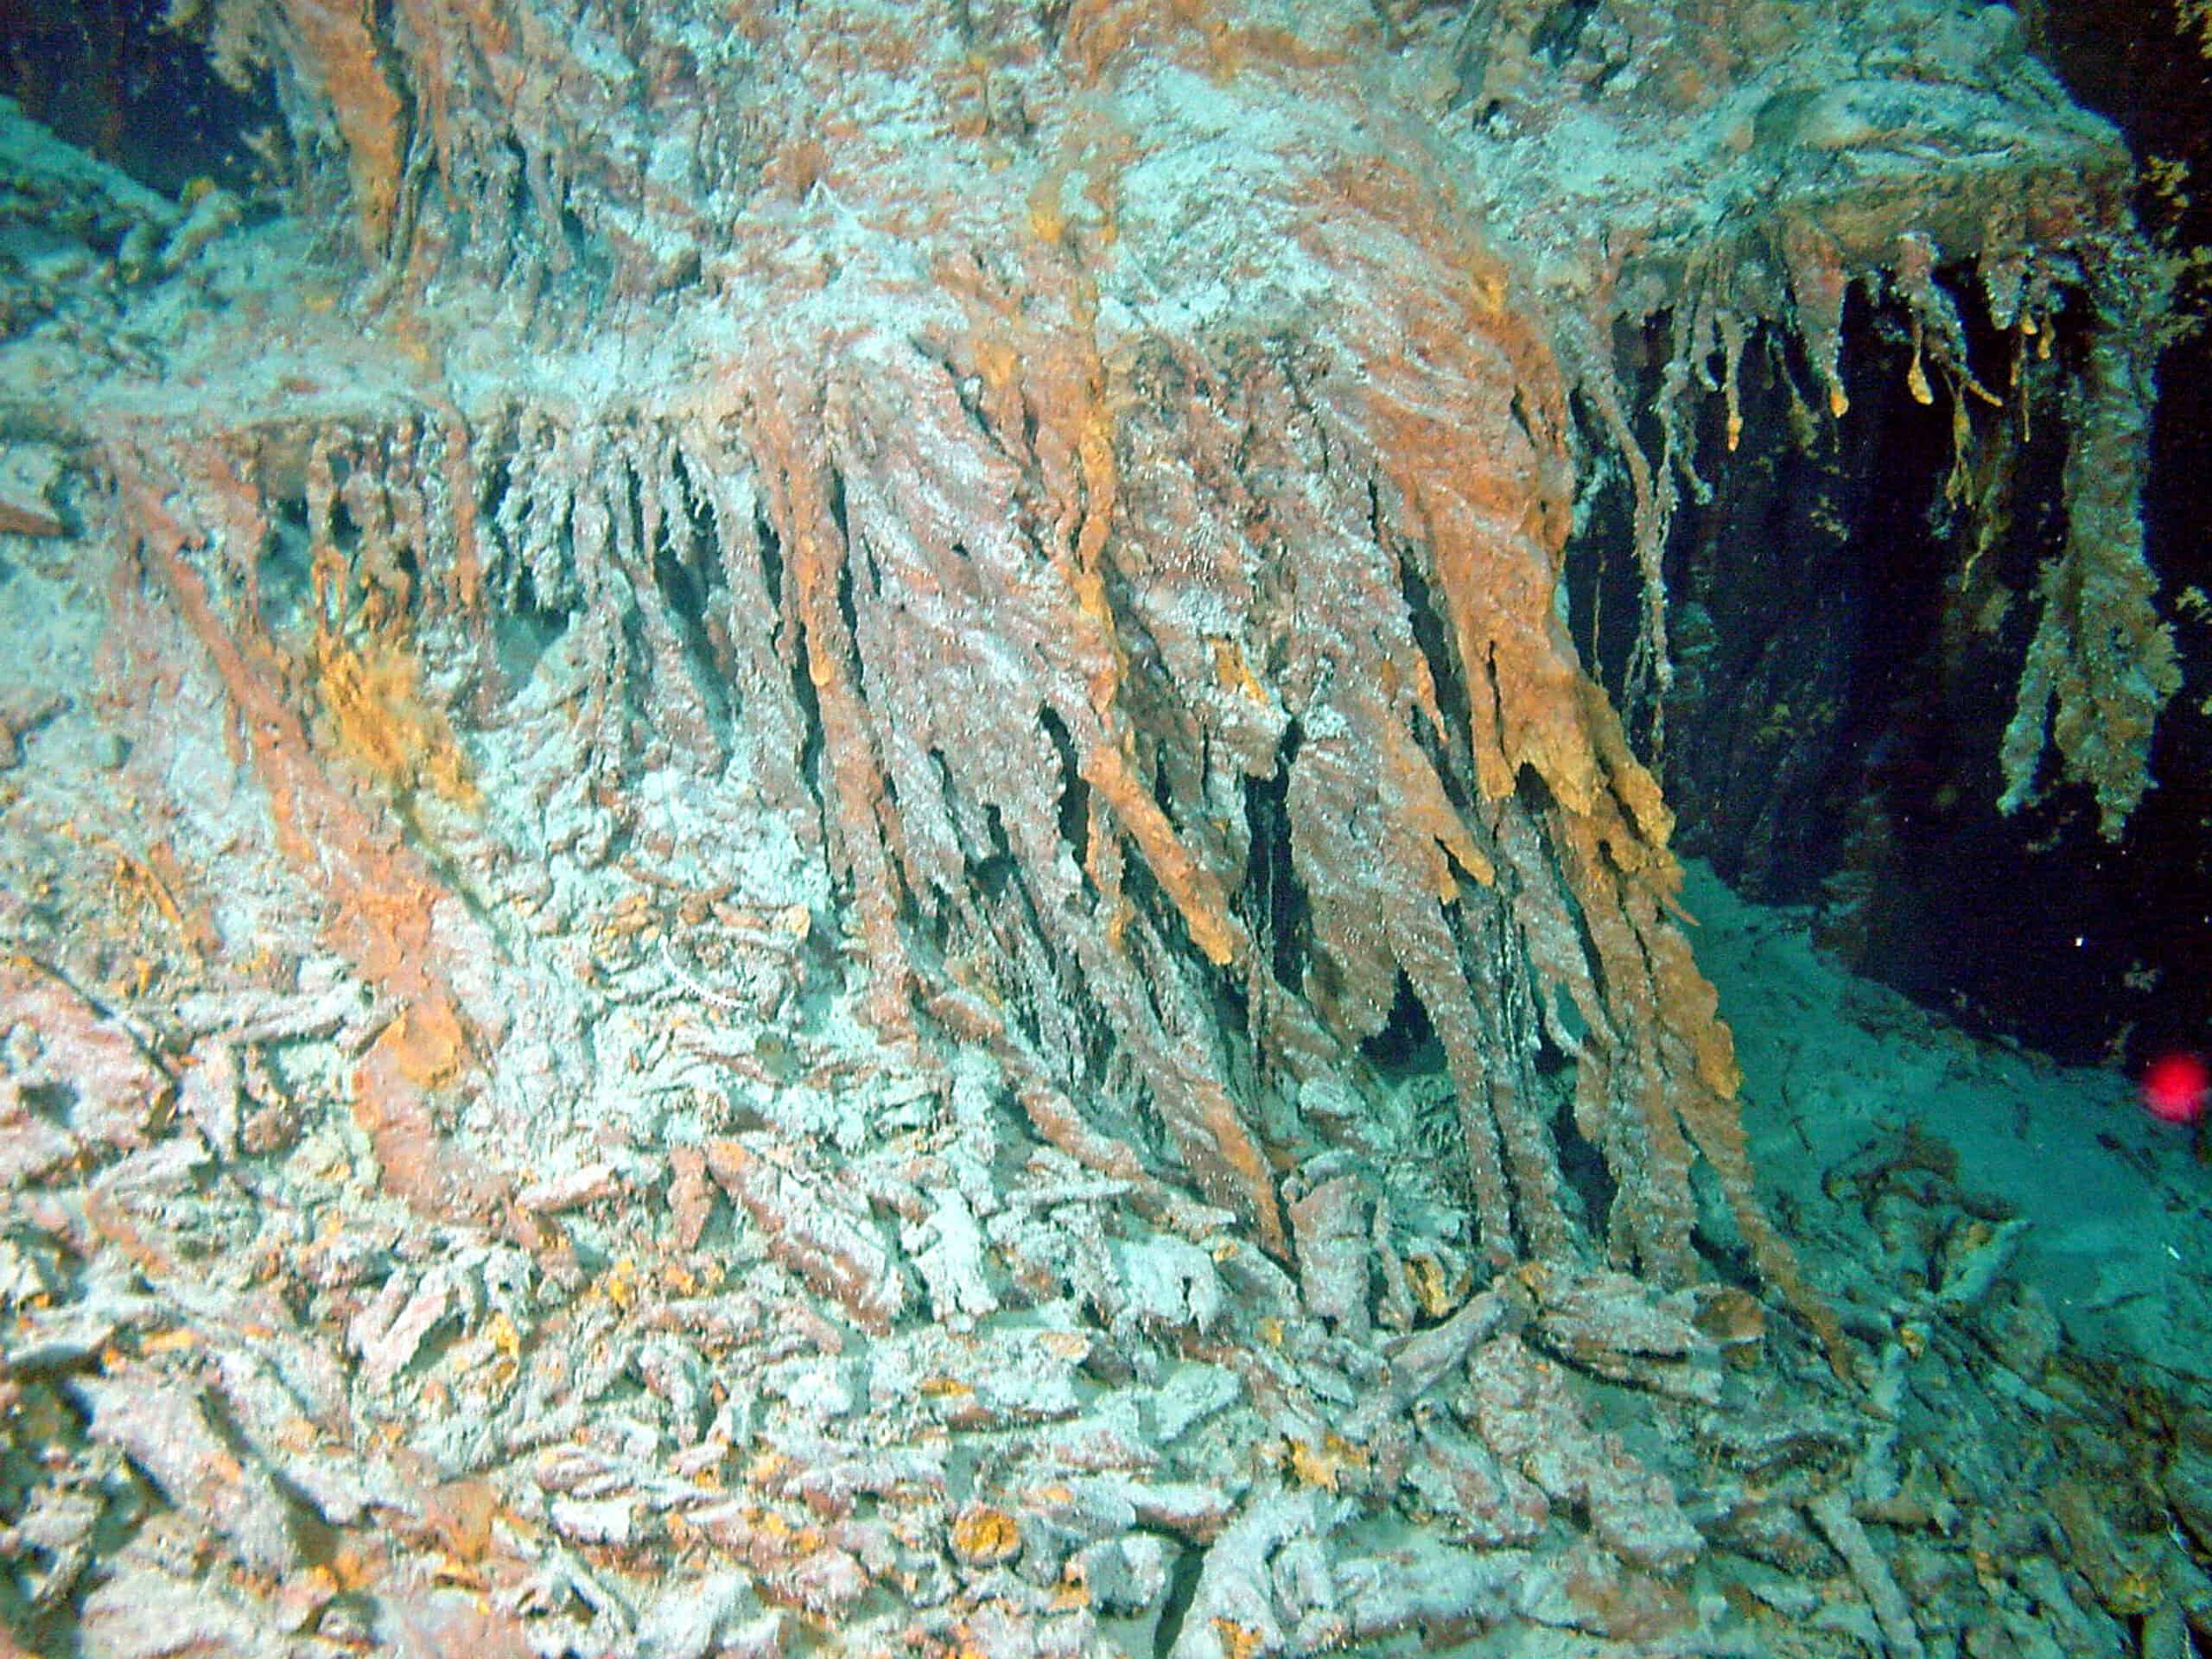 <p>One of the strangest pictures of the Titanic that is available today is that of the rusticles. These bacteria and archaea have taken over the metal hull of the ship. Best described as metal icicles, these rusticles have covered the hull but have also preserved some of the interior aspects of the ship. </p><p><span>Would you please let us know what you think about our content? <p>Agree? Tell us by clicking the “Thumbs Up” button above.</p> Disagree? Leave a comment telling us what you’d change.</span></p>